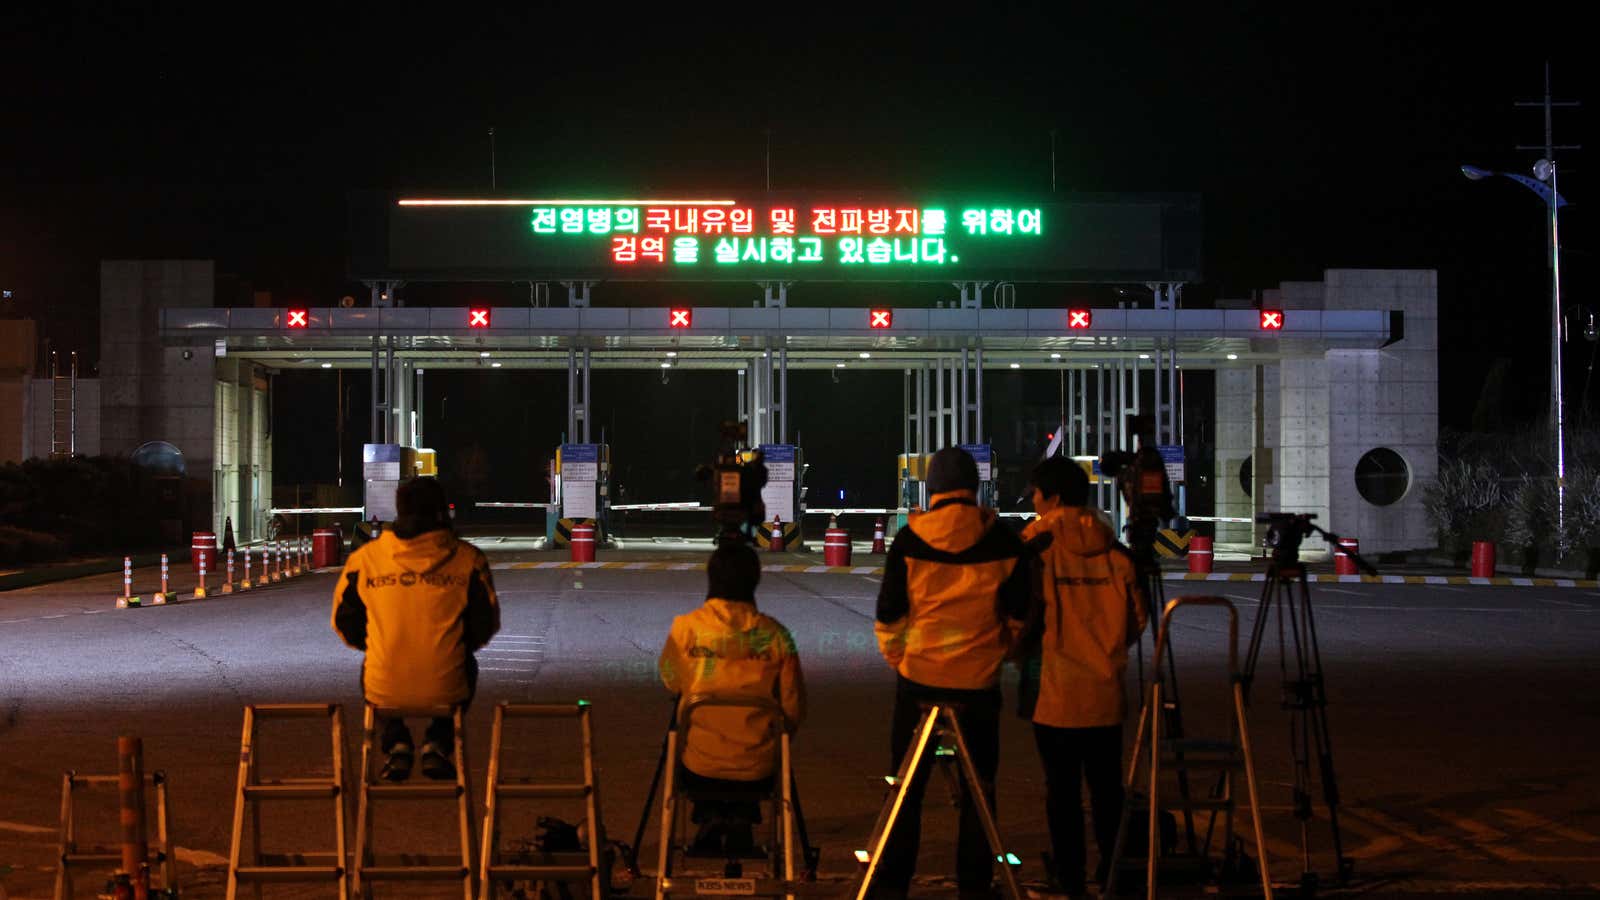 Waiting, and watching, at the Kaesong complex border crossing.